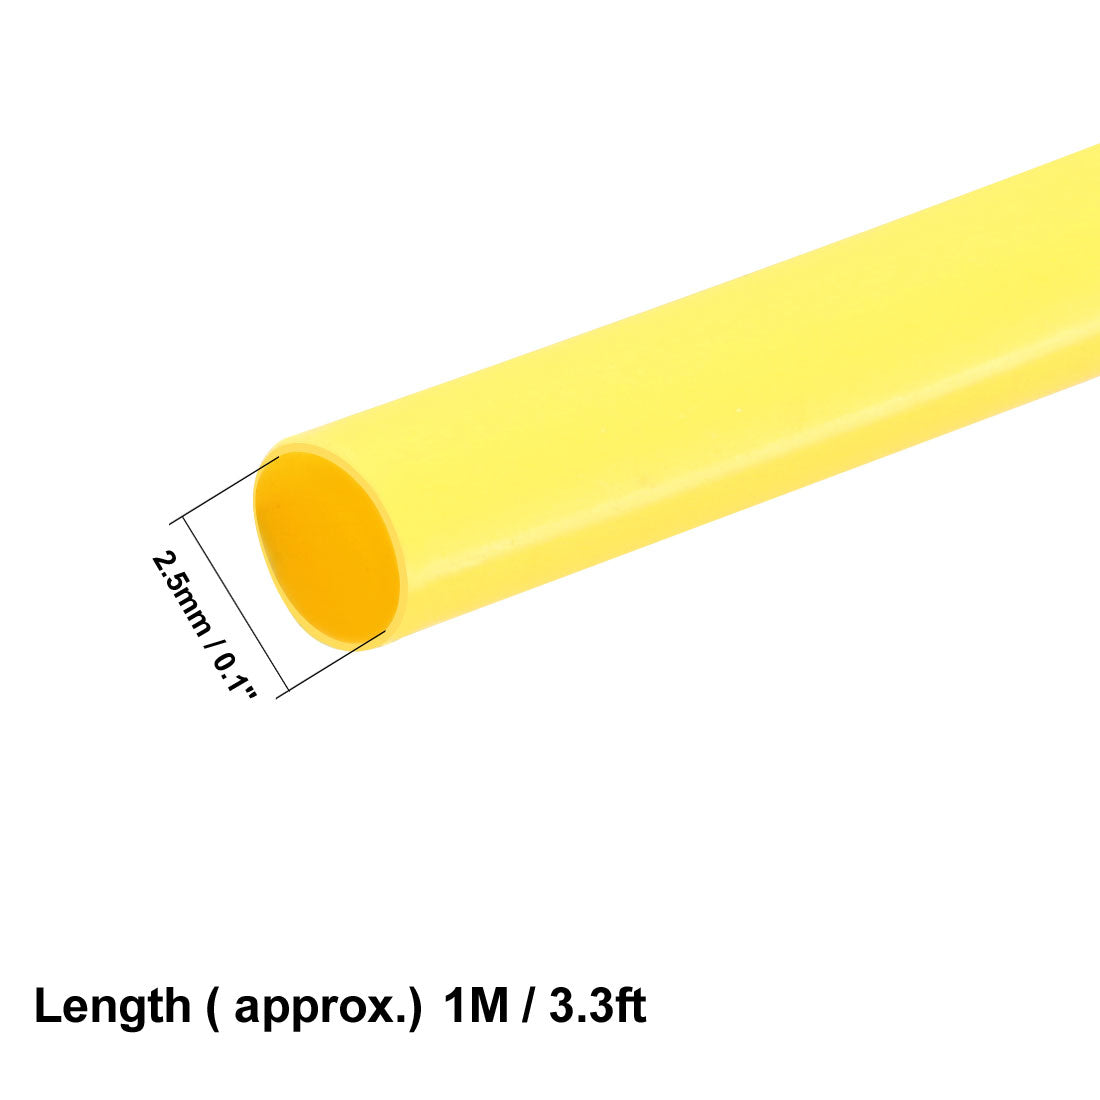 uxcell Uxcell Heat Shrink Tube 2:1 Electrical Insulation Tube Wire Cable Tubing Sleeving Wrap Yellow 2.5mm Diameter 1m Long